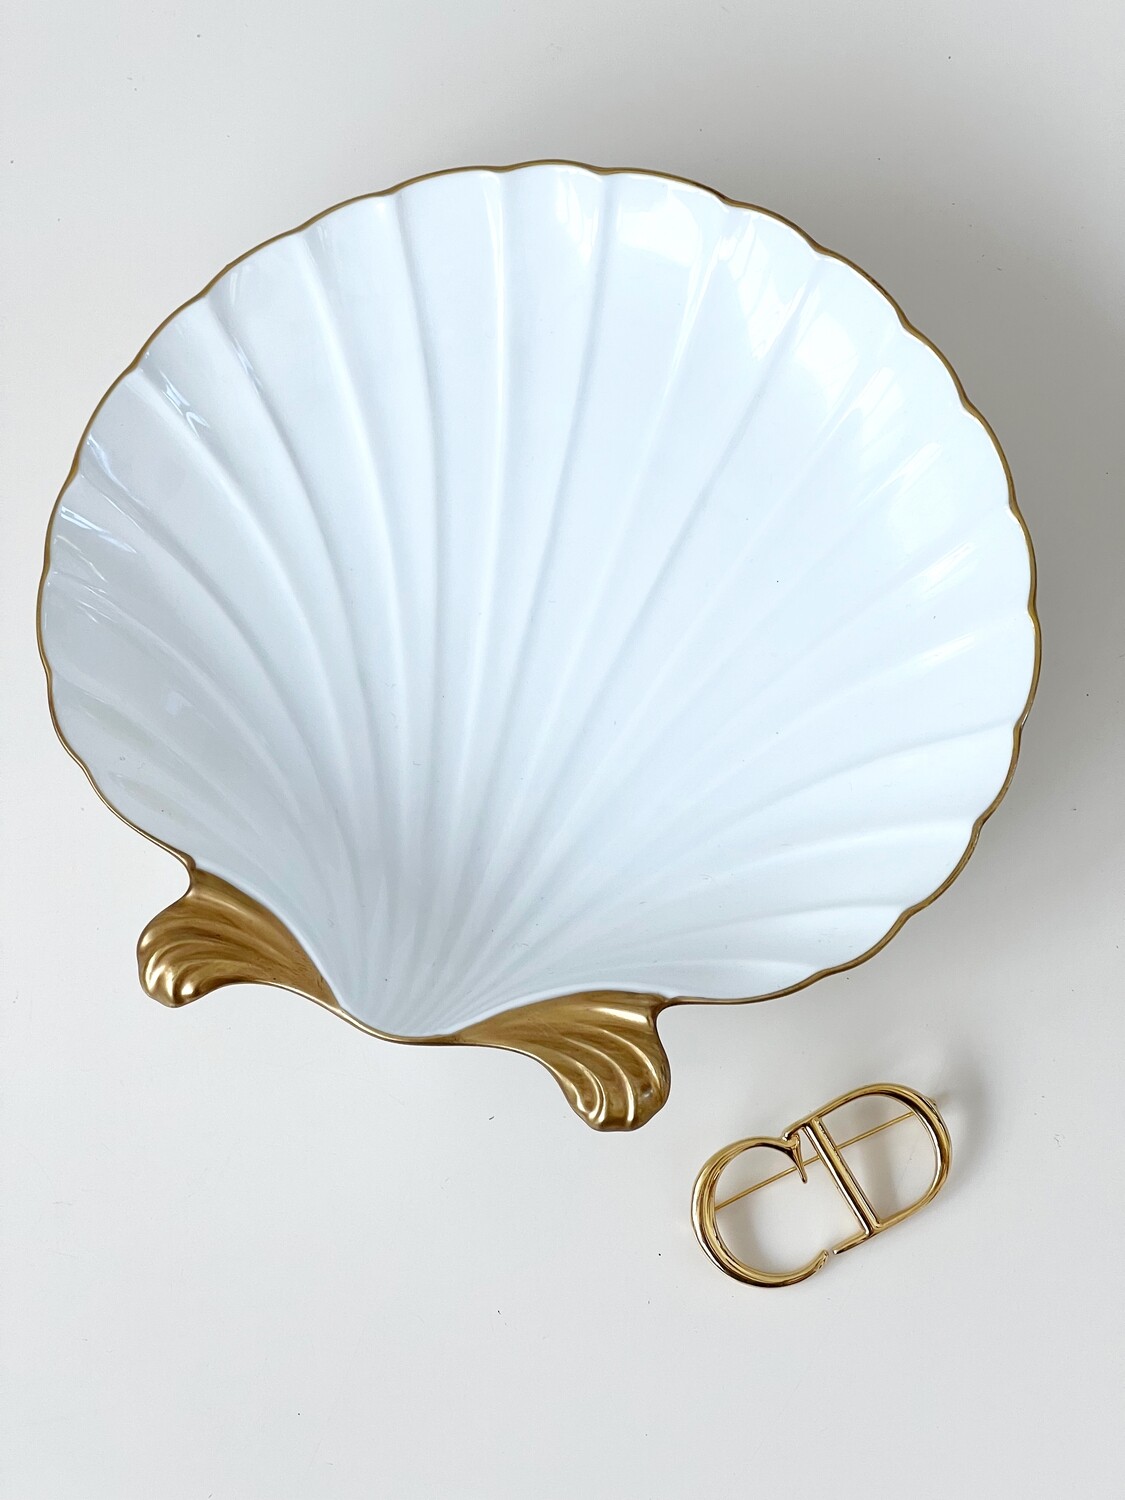 CHRISTIAN DIOR VINTAGE PORCELAIN SEASHELL CATCH ALL DISH / TRINKET TRAY WITH 24K GOLD DETAIL